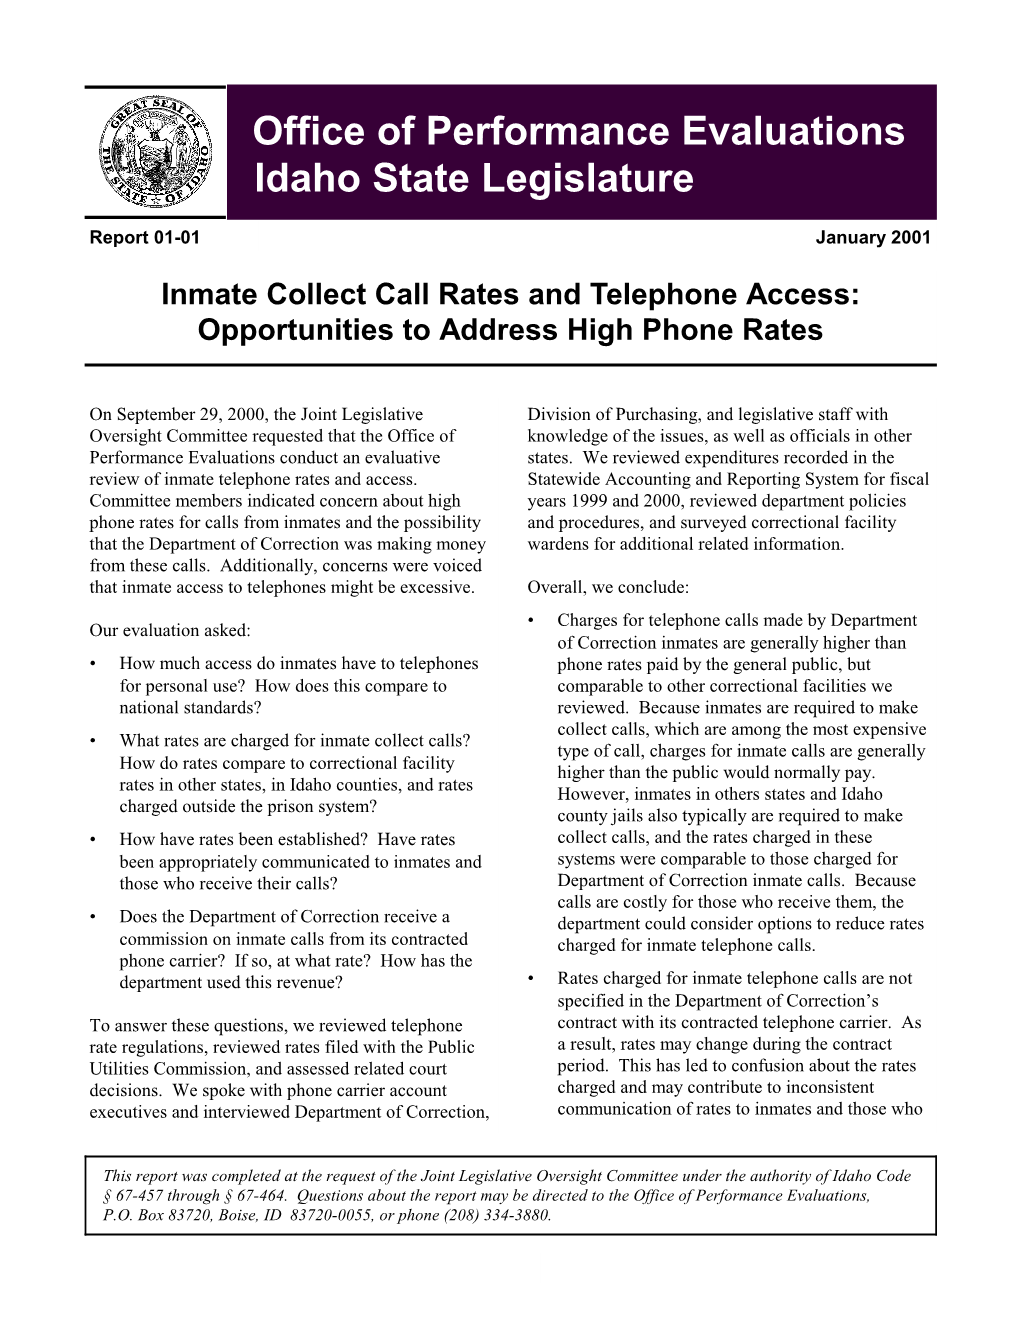 Inmate Collect Call Rates and Telephone Access: Opportunities to Address High Phone Rates